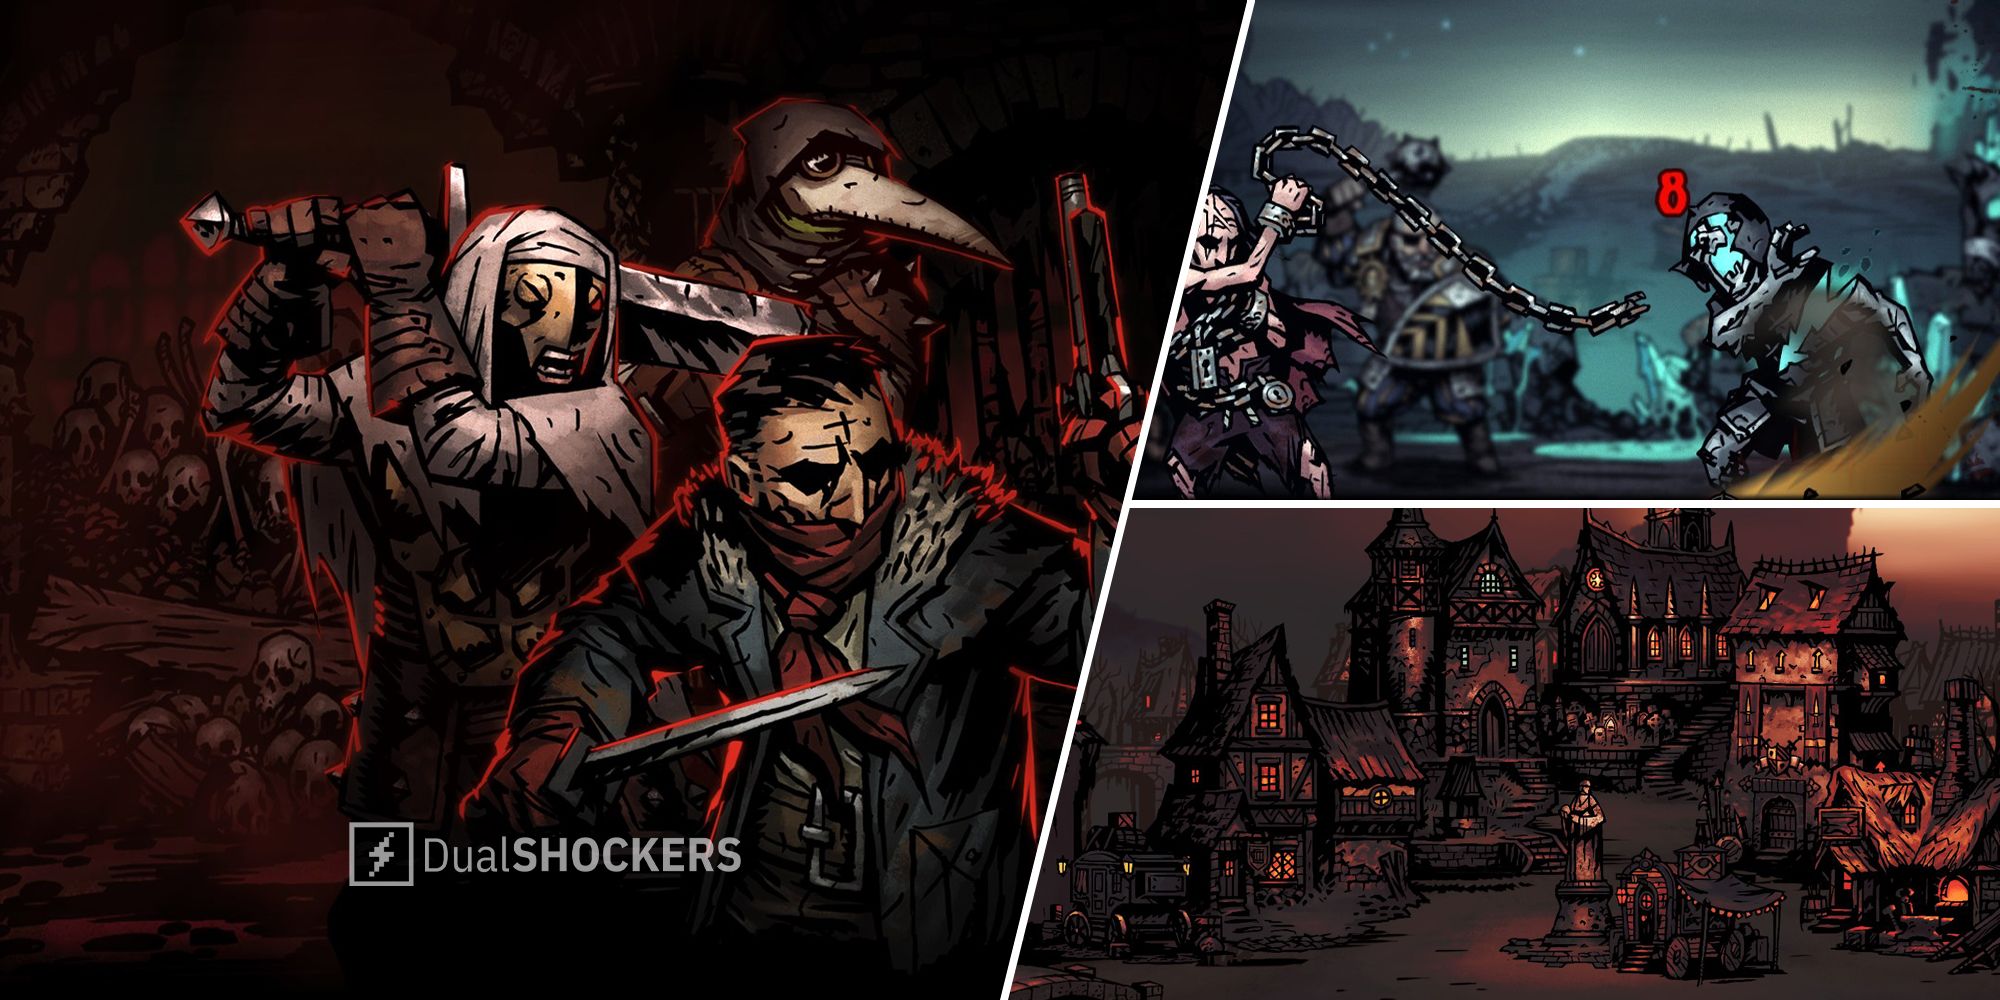 Darkest Dungeon characters and gameplay